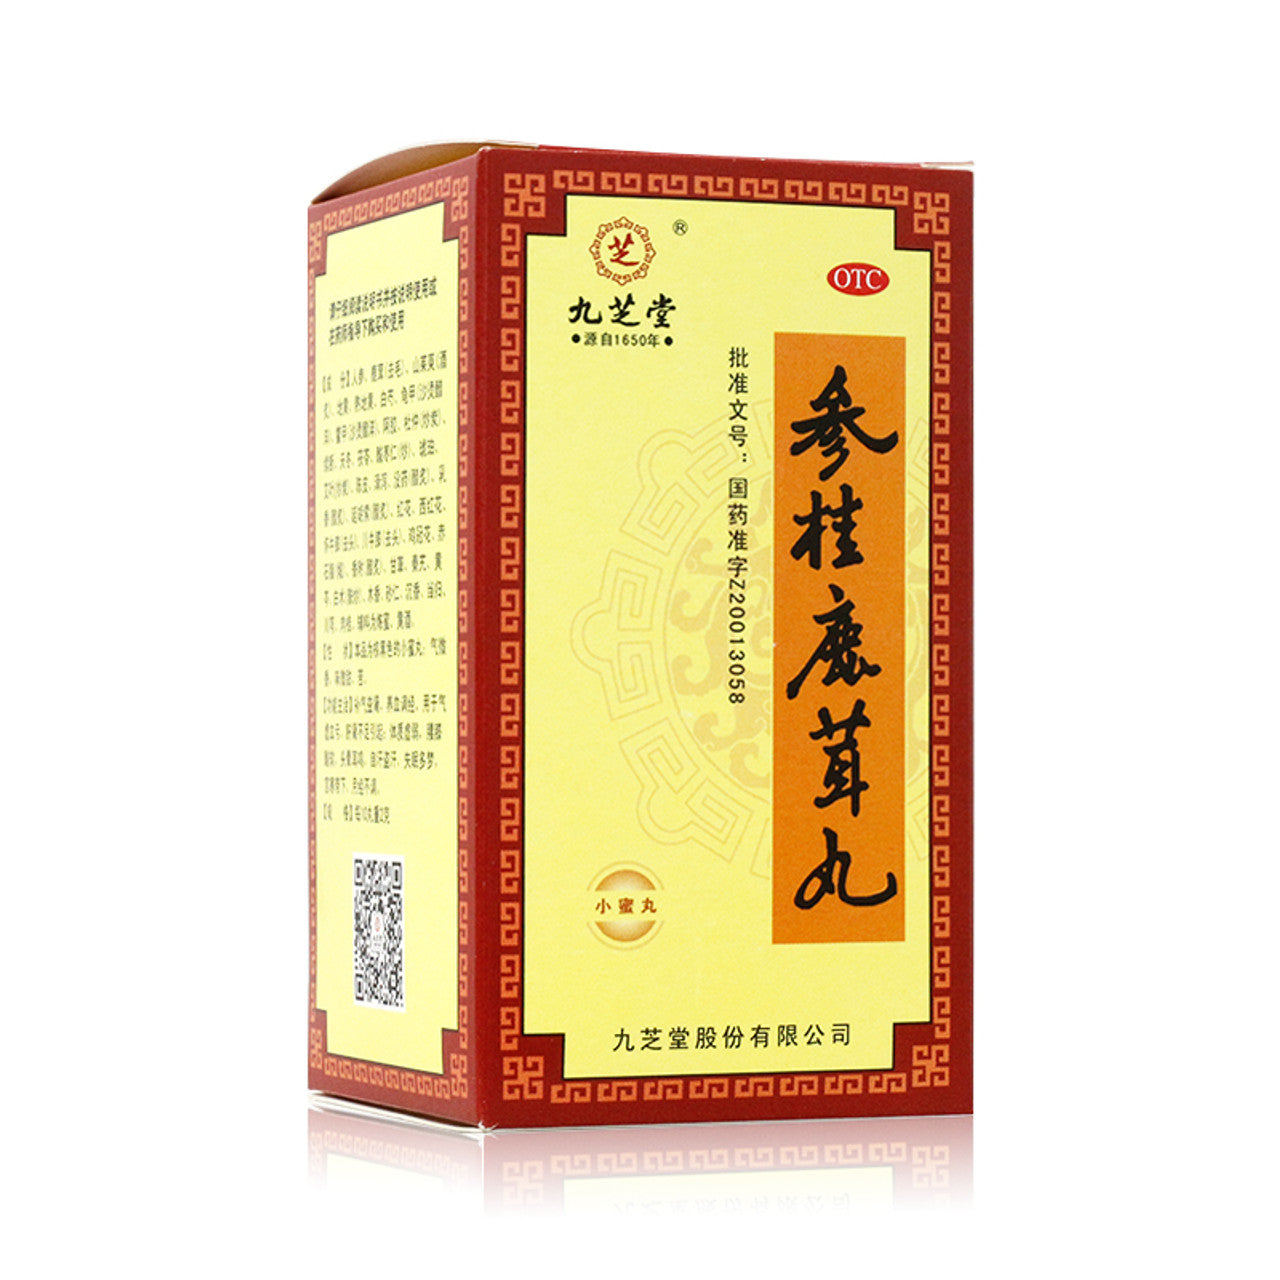 China Herb. Shengui Lurong Wan or Shengui Lurong Pills for weak physique, sore waist and knees, dizziness, tinnitus, spontaneous sweating, insomnia, dreaminess, cold kidney, cold uterine zone, irregular menstruation. Shen Gui Lu Rong Wan